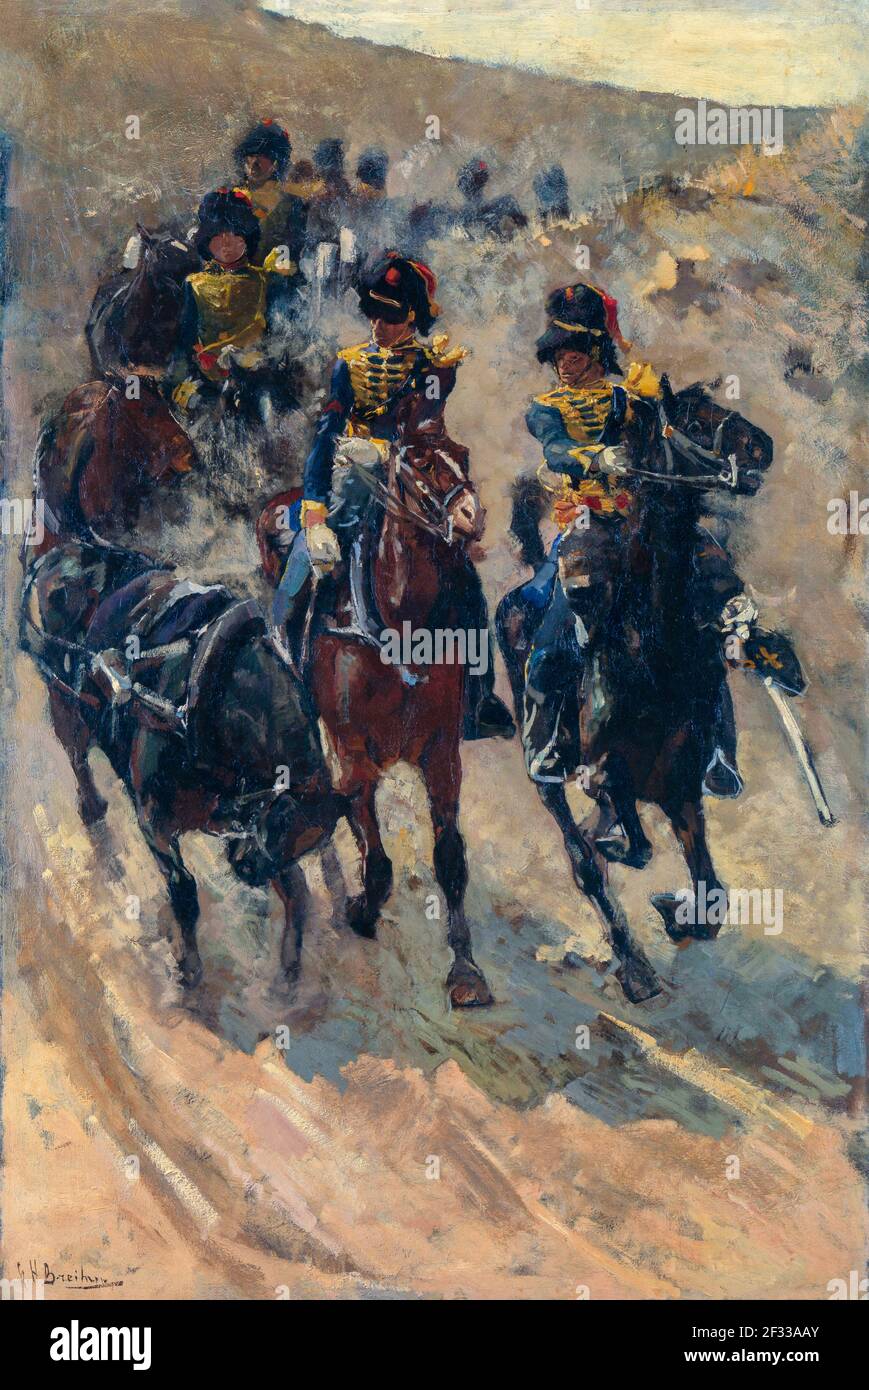 Mobile artillery. A group of riders comes running down a dune. This work is also known under the title 'De Gele Rijders'. The elite ‘Yellow Riders’ (a Stock Photo